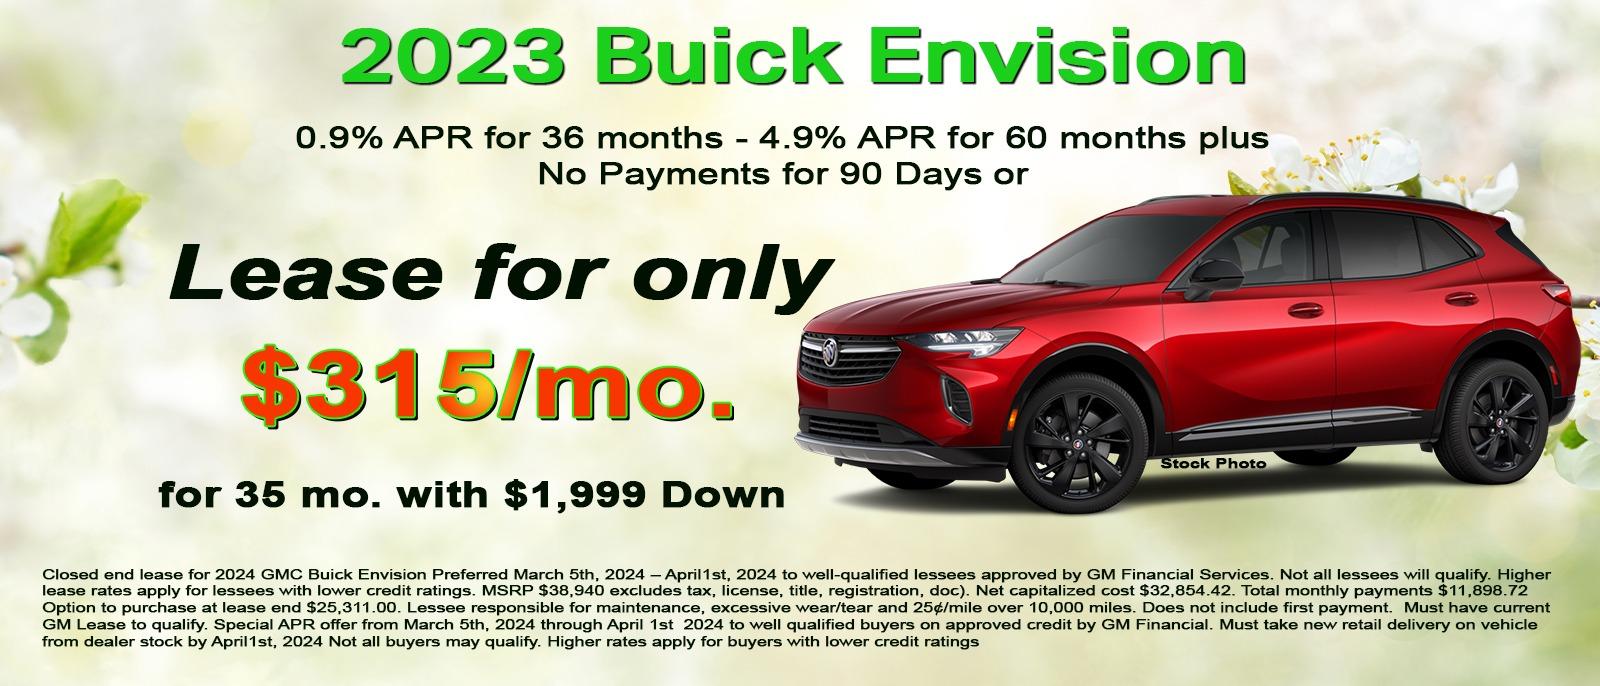 Lease your new Buick Envision for only $351 per month